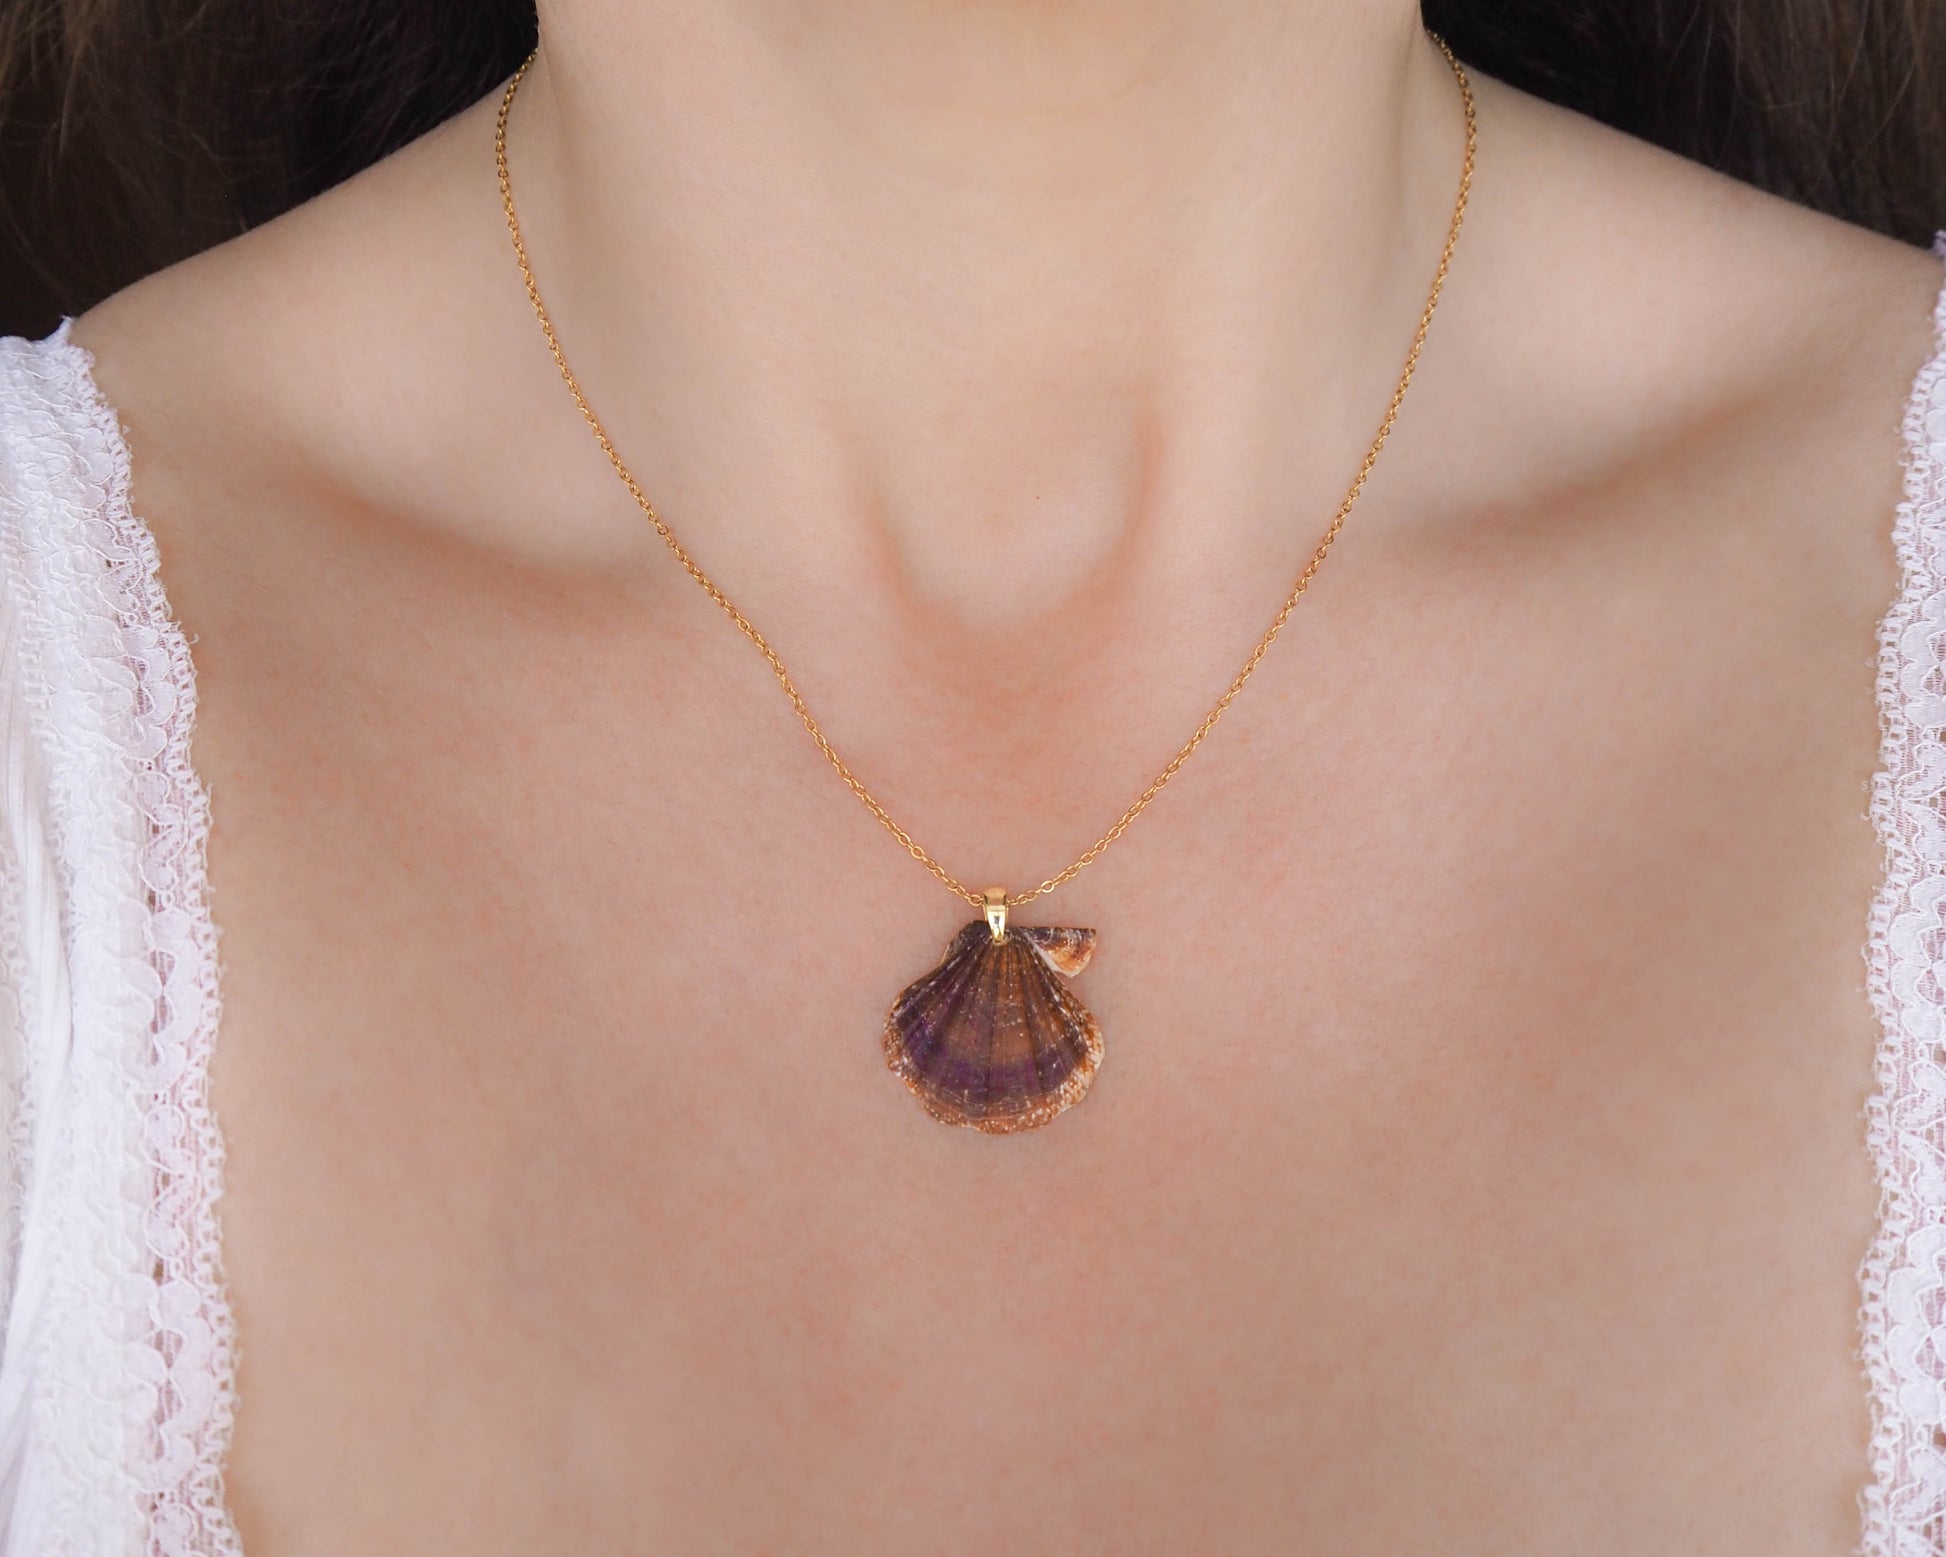 Model wearing Brown Scallop Shell Necklace with Gold Chain